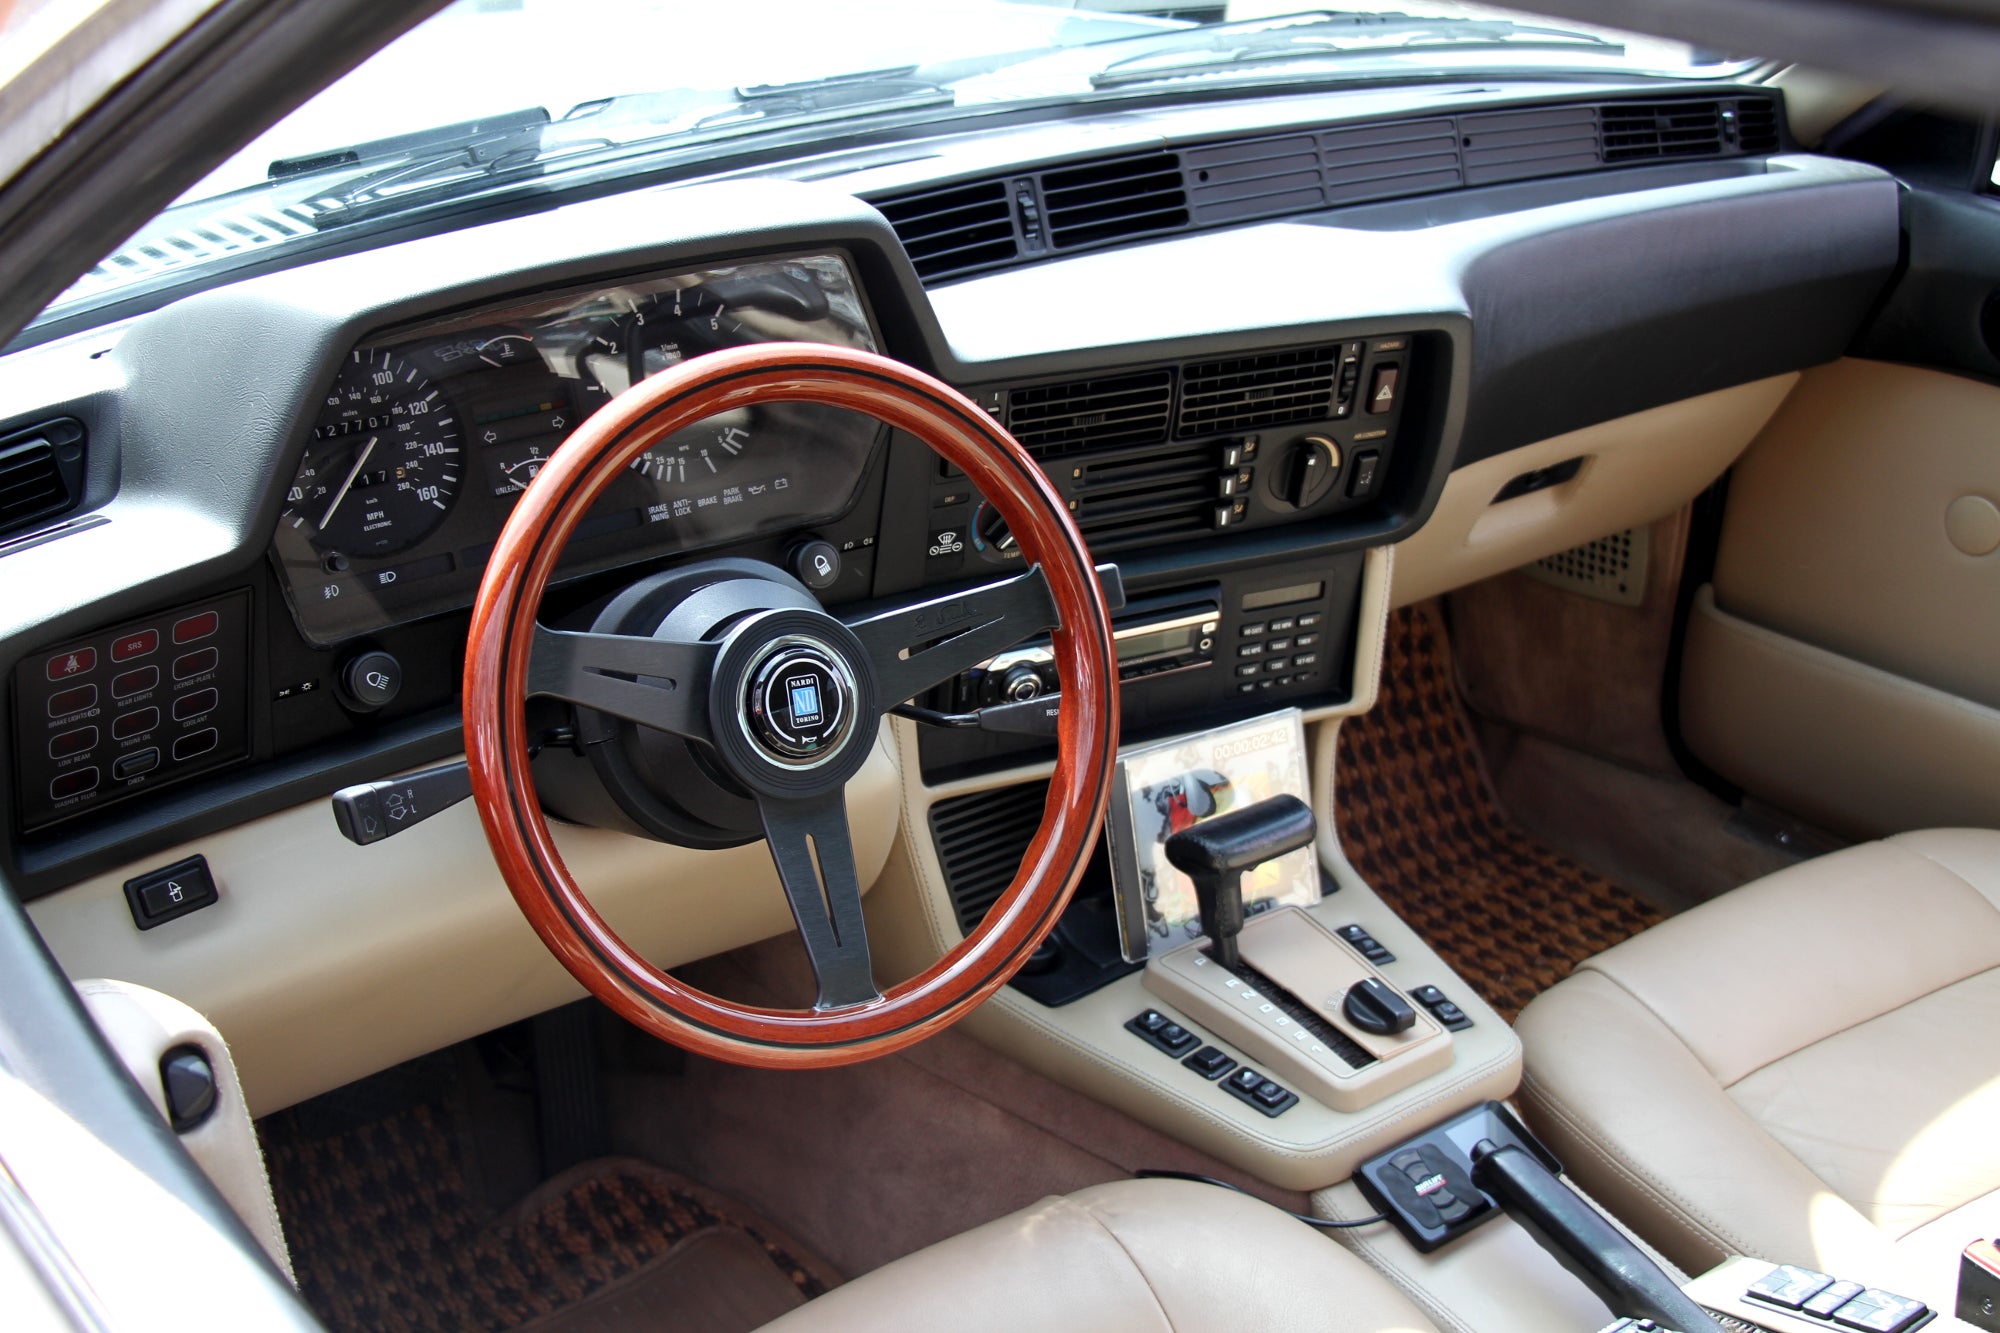 https://www.autance.com/vintage/2347/behind-the-wheel-of-the-only-v-12-toyota-century-in-north-america